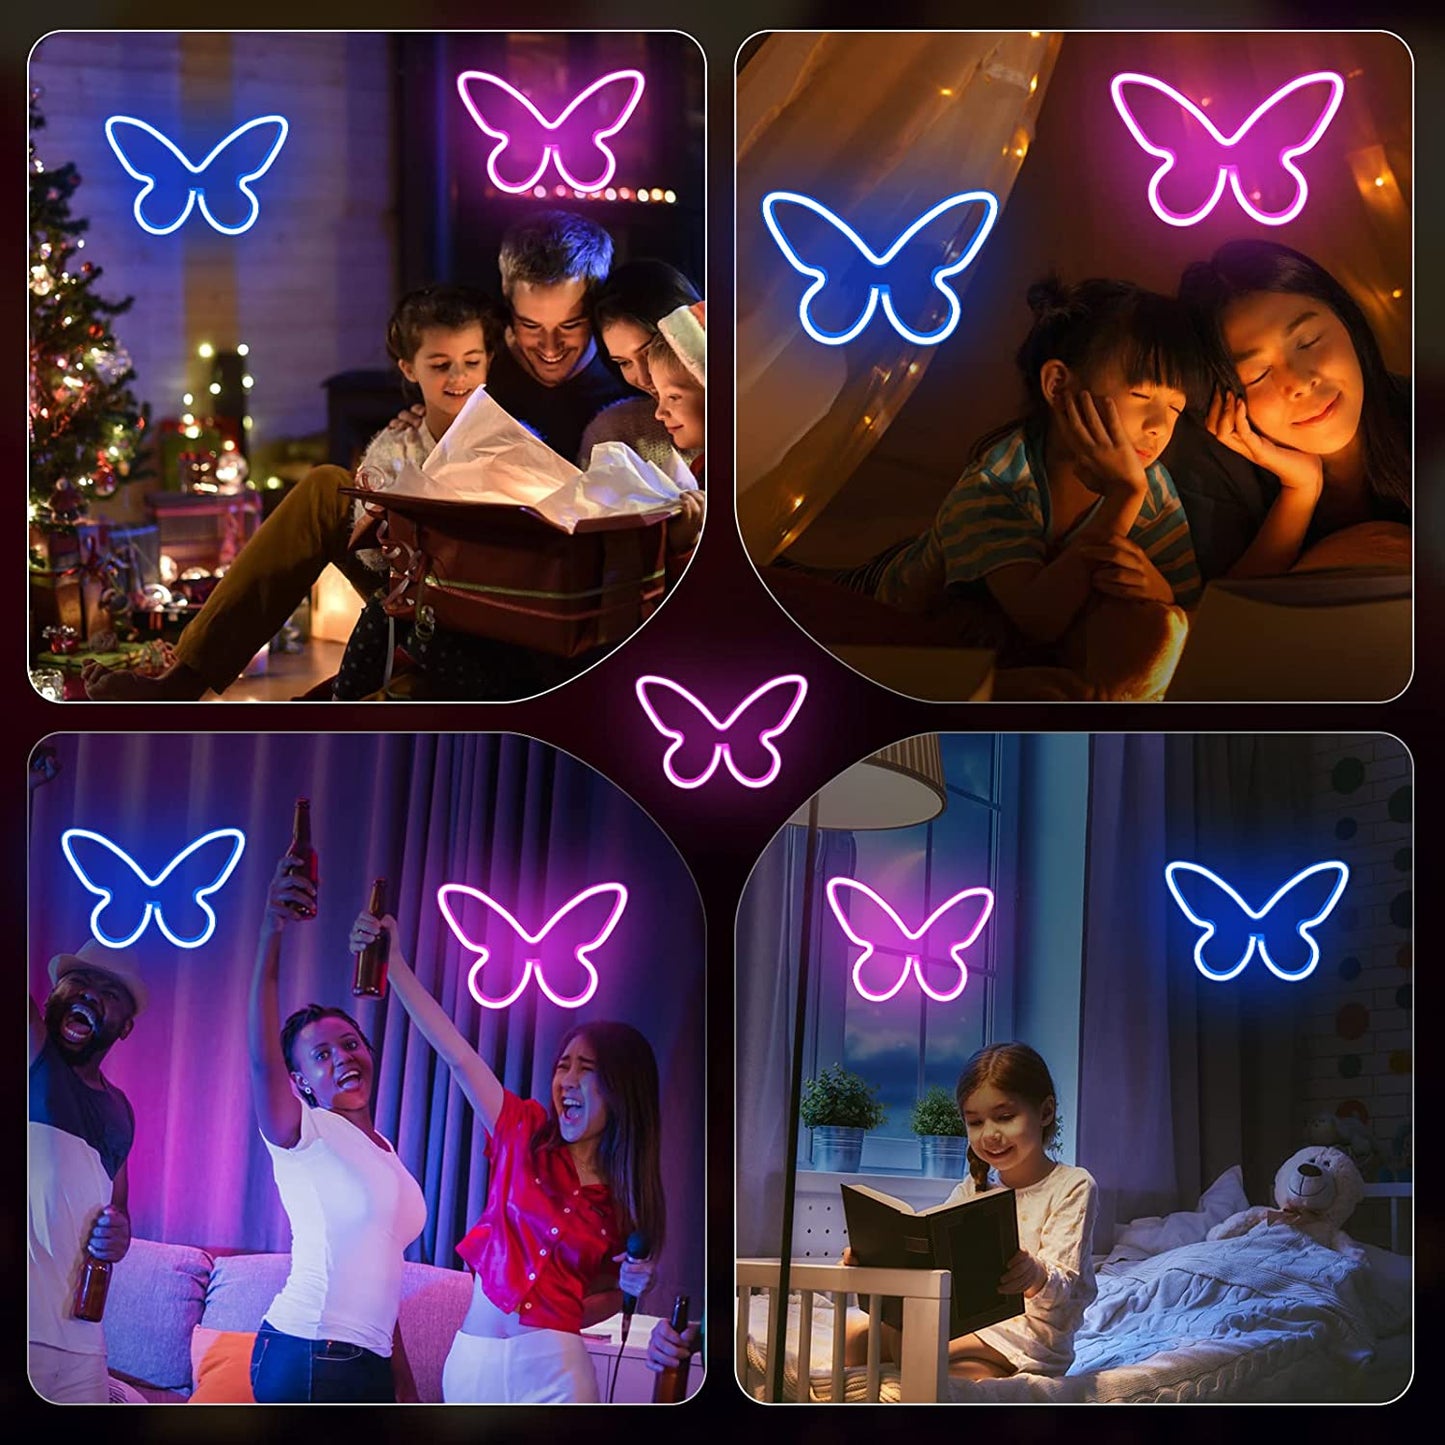 2 Pieces Butterfly Neon Signs for Wall Decor, LED Neon Light Sign Powered by Battery or USB, Butterfly Neon Light up Sign for Teenage Girls Room Decor, Birthday Gift, Party, Wedding,Bar,Bedroom